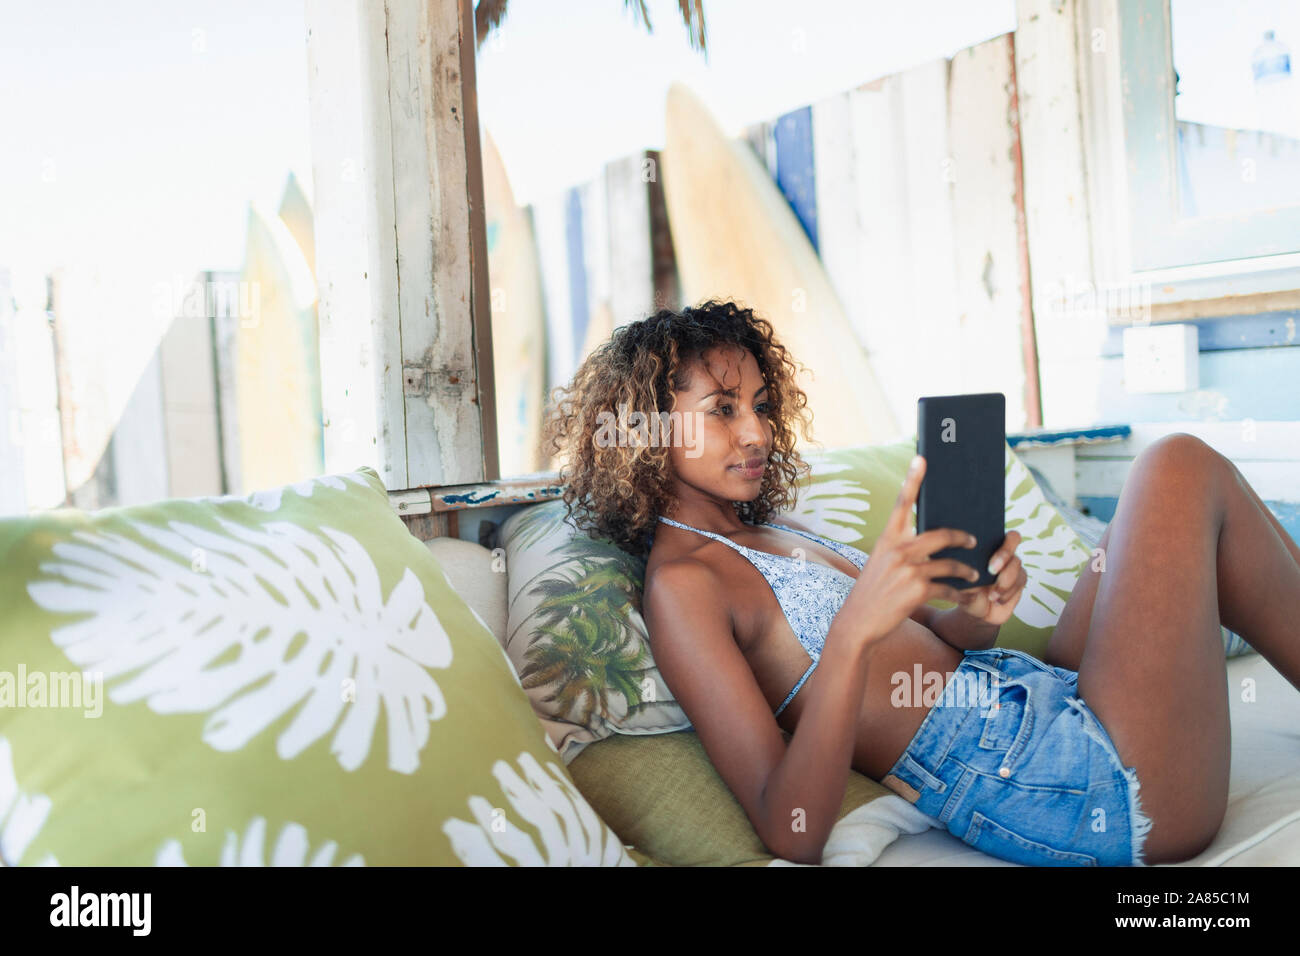 Young woman using digital tablet on beach patio Stock Photo